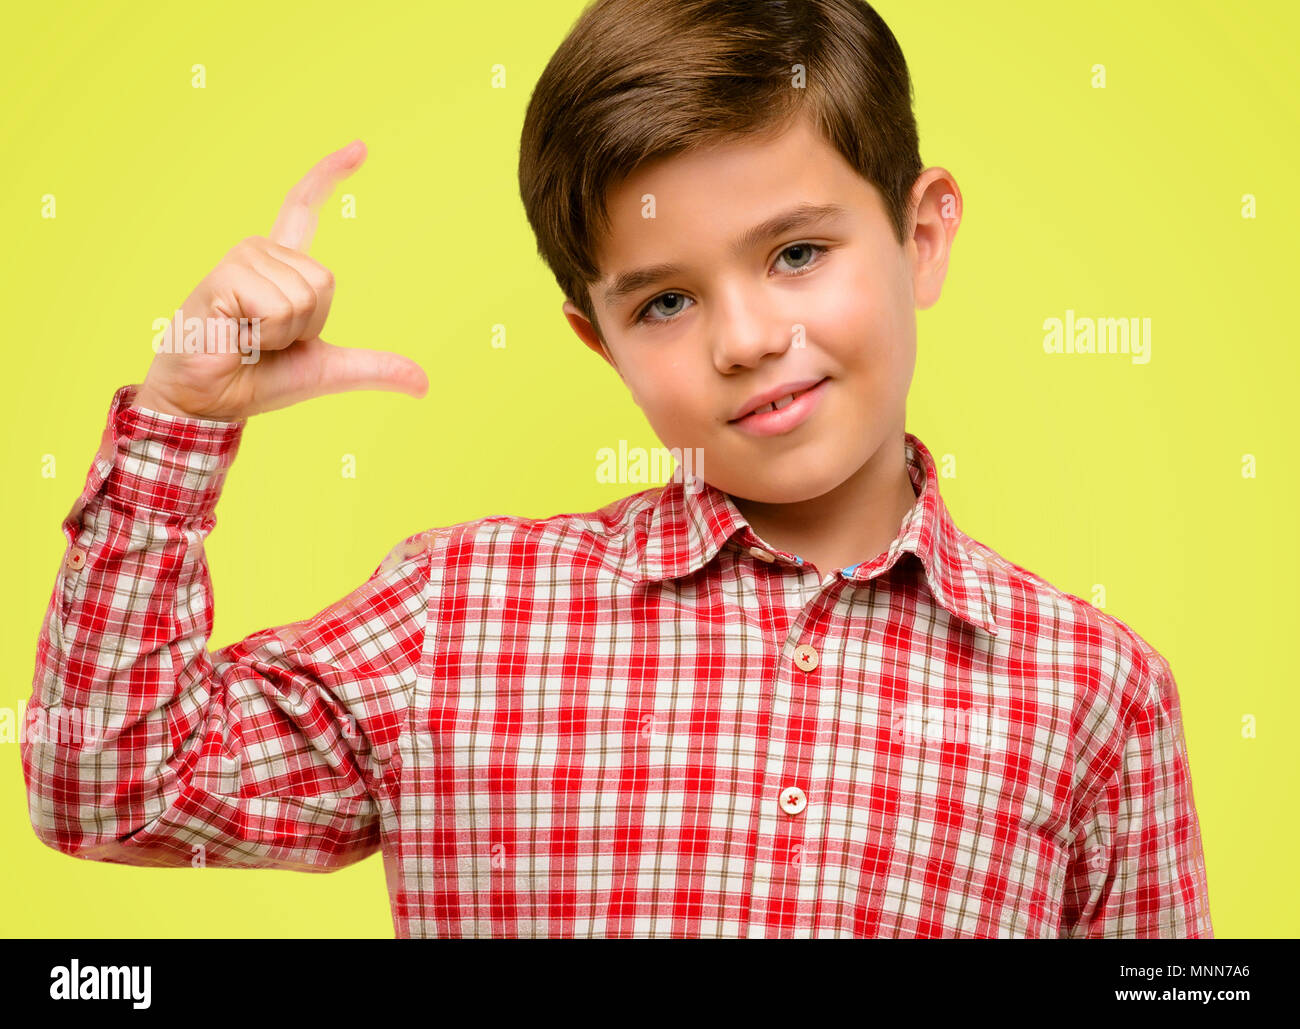 Handsome toddler child with green eyes holding something very tiny, size concept over yellow background Stock Photo